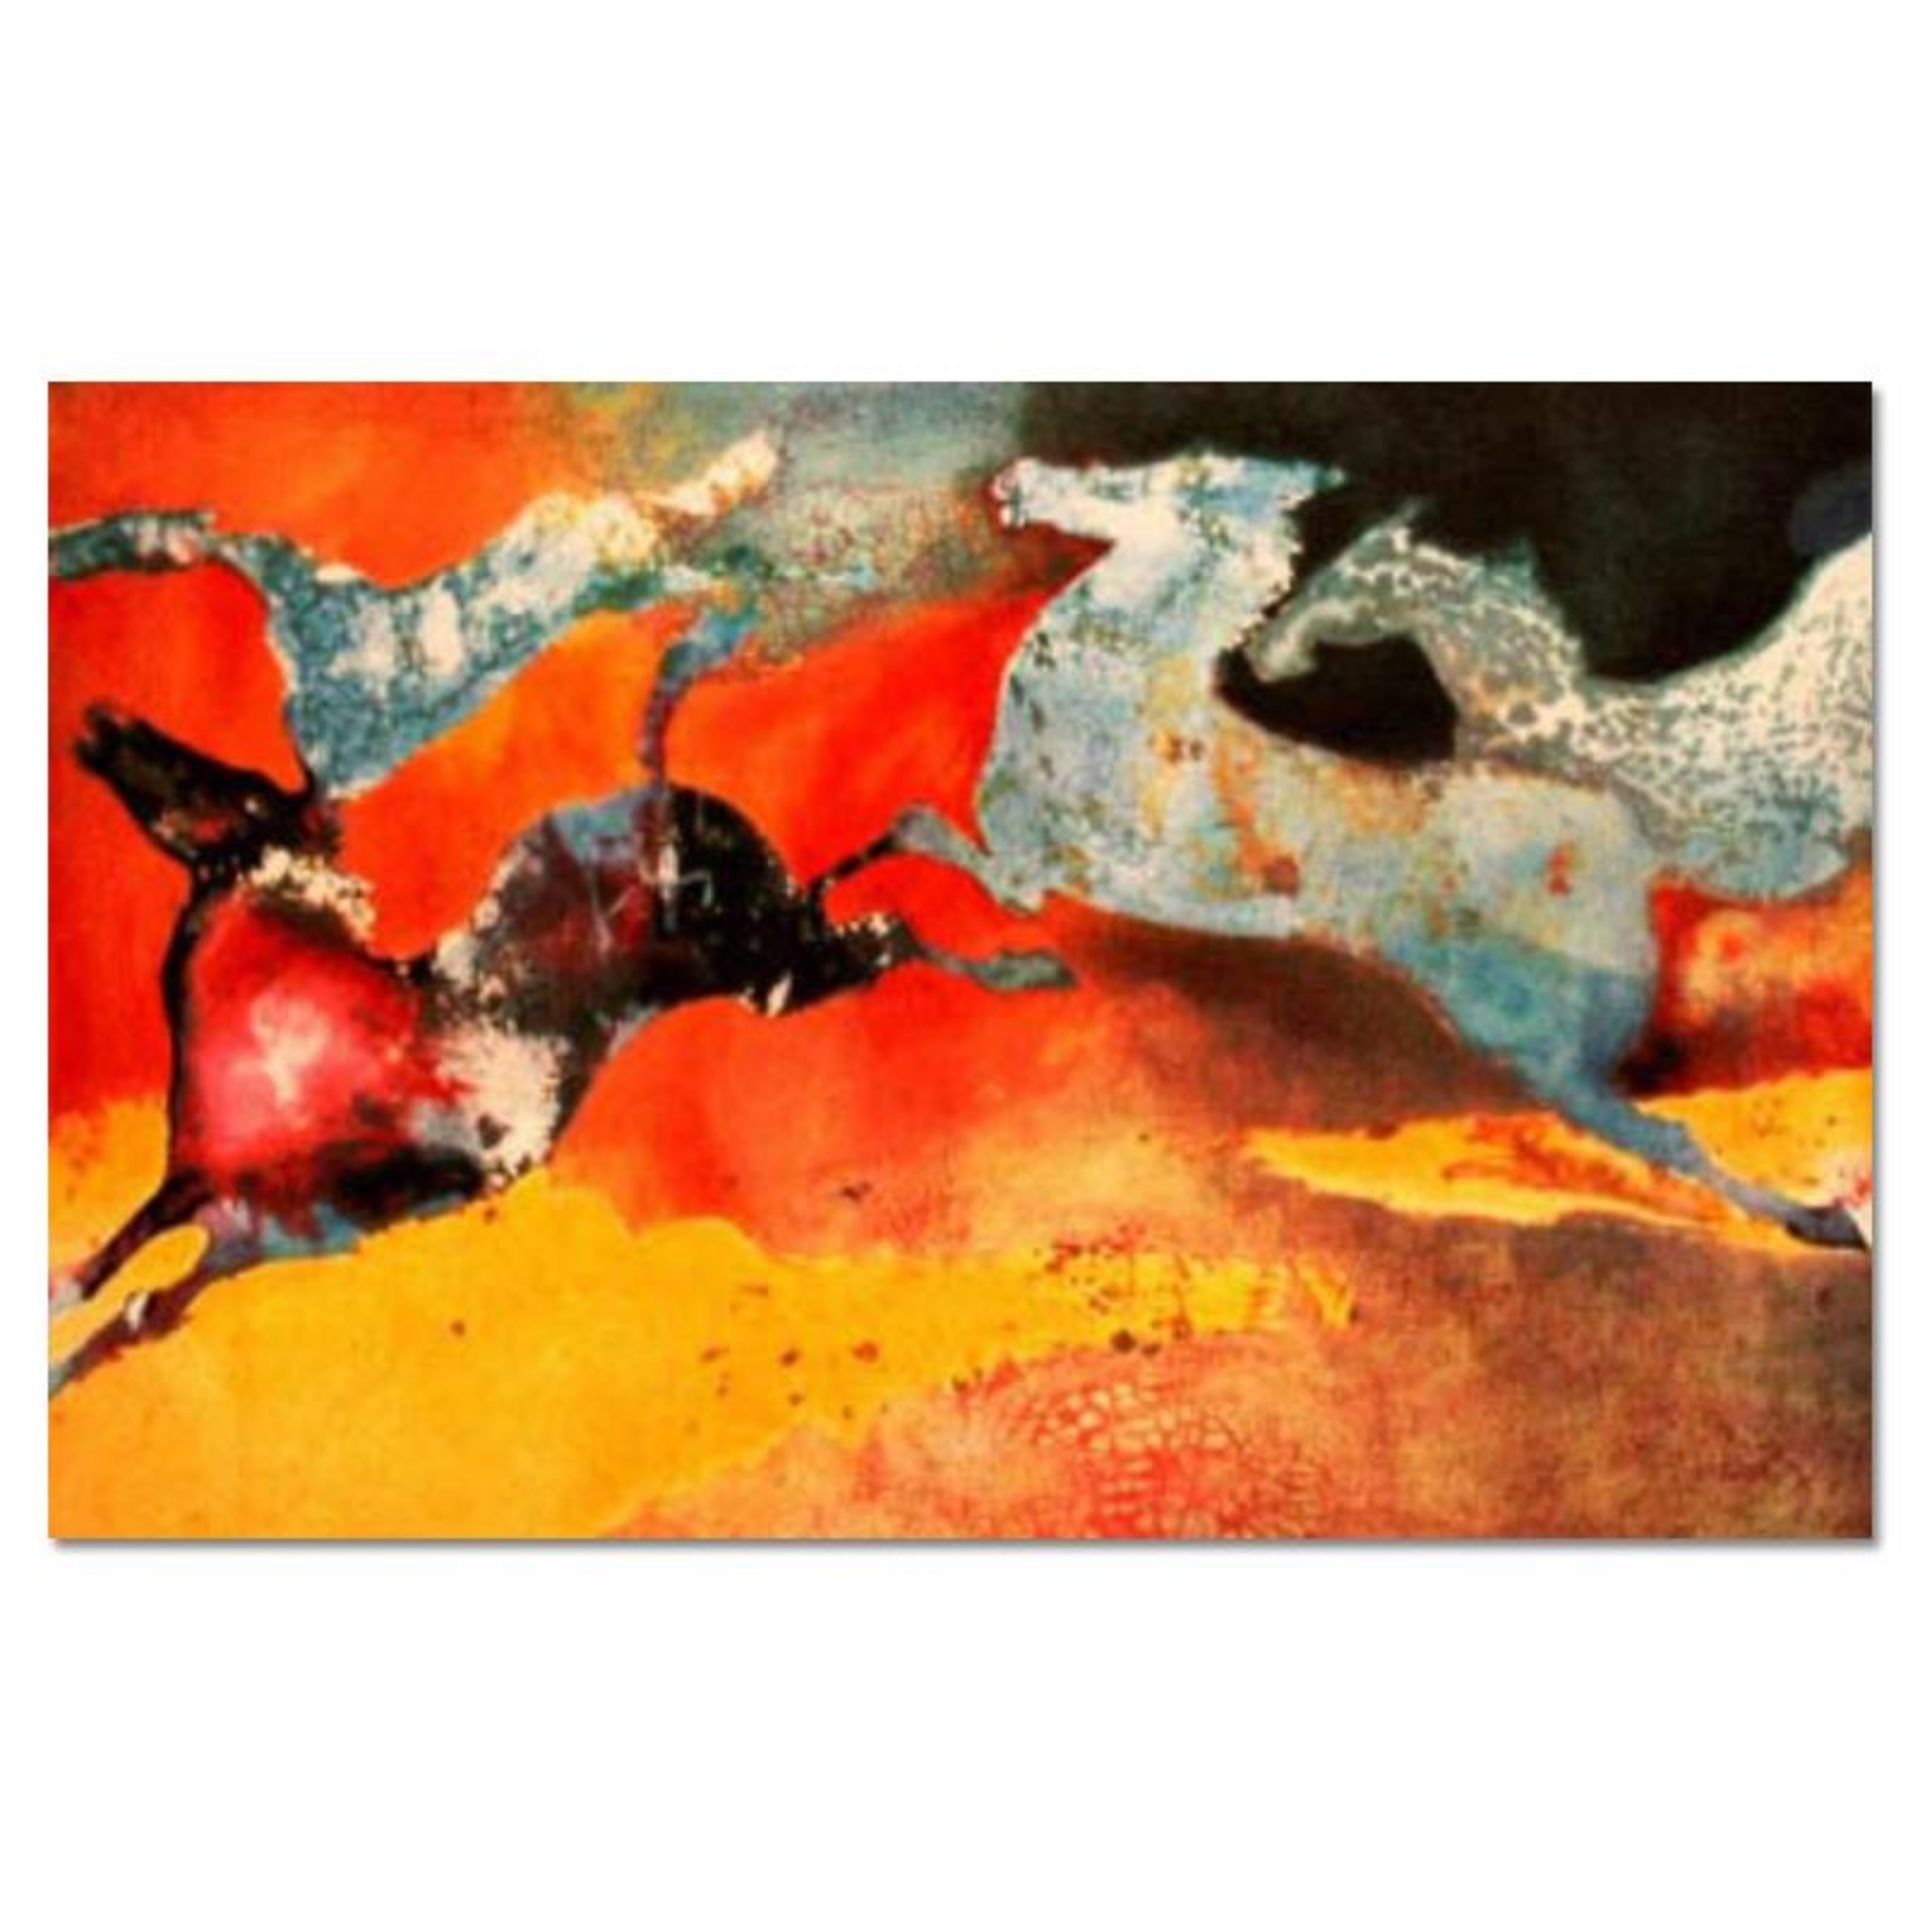 Edwin Salomon, "Summer Dance" Hand Signed Limited Edition Serigraph with Letter